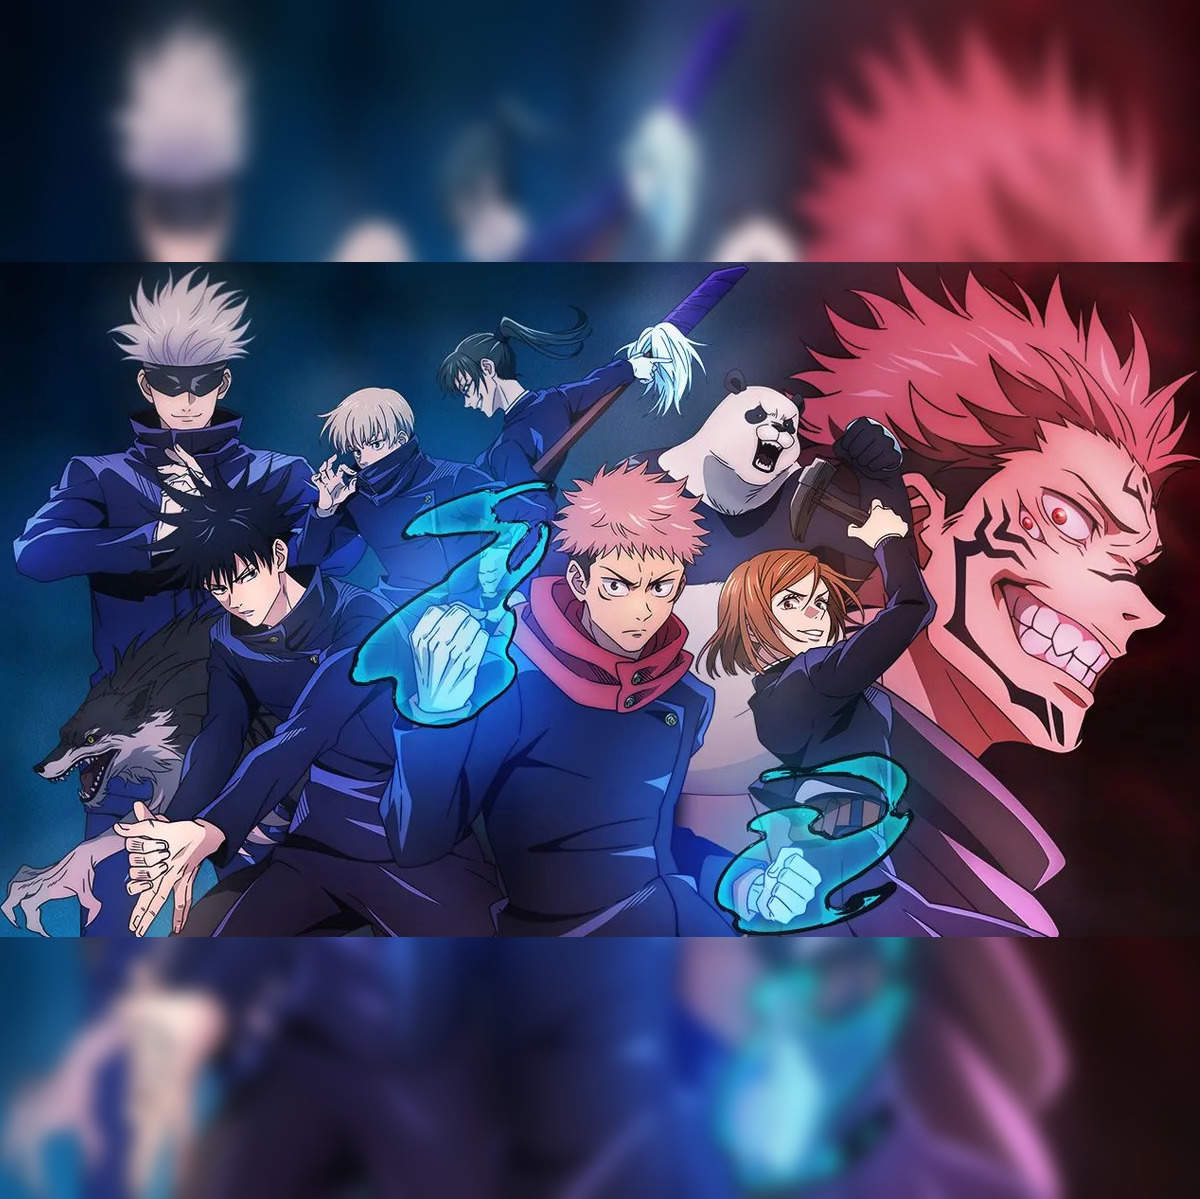 jujutsu kaisen season 2: Jujutsu Kaisen Season 2 Episode 18: Release date,  where to watch, and what to expect - The Economic Times